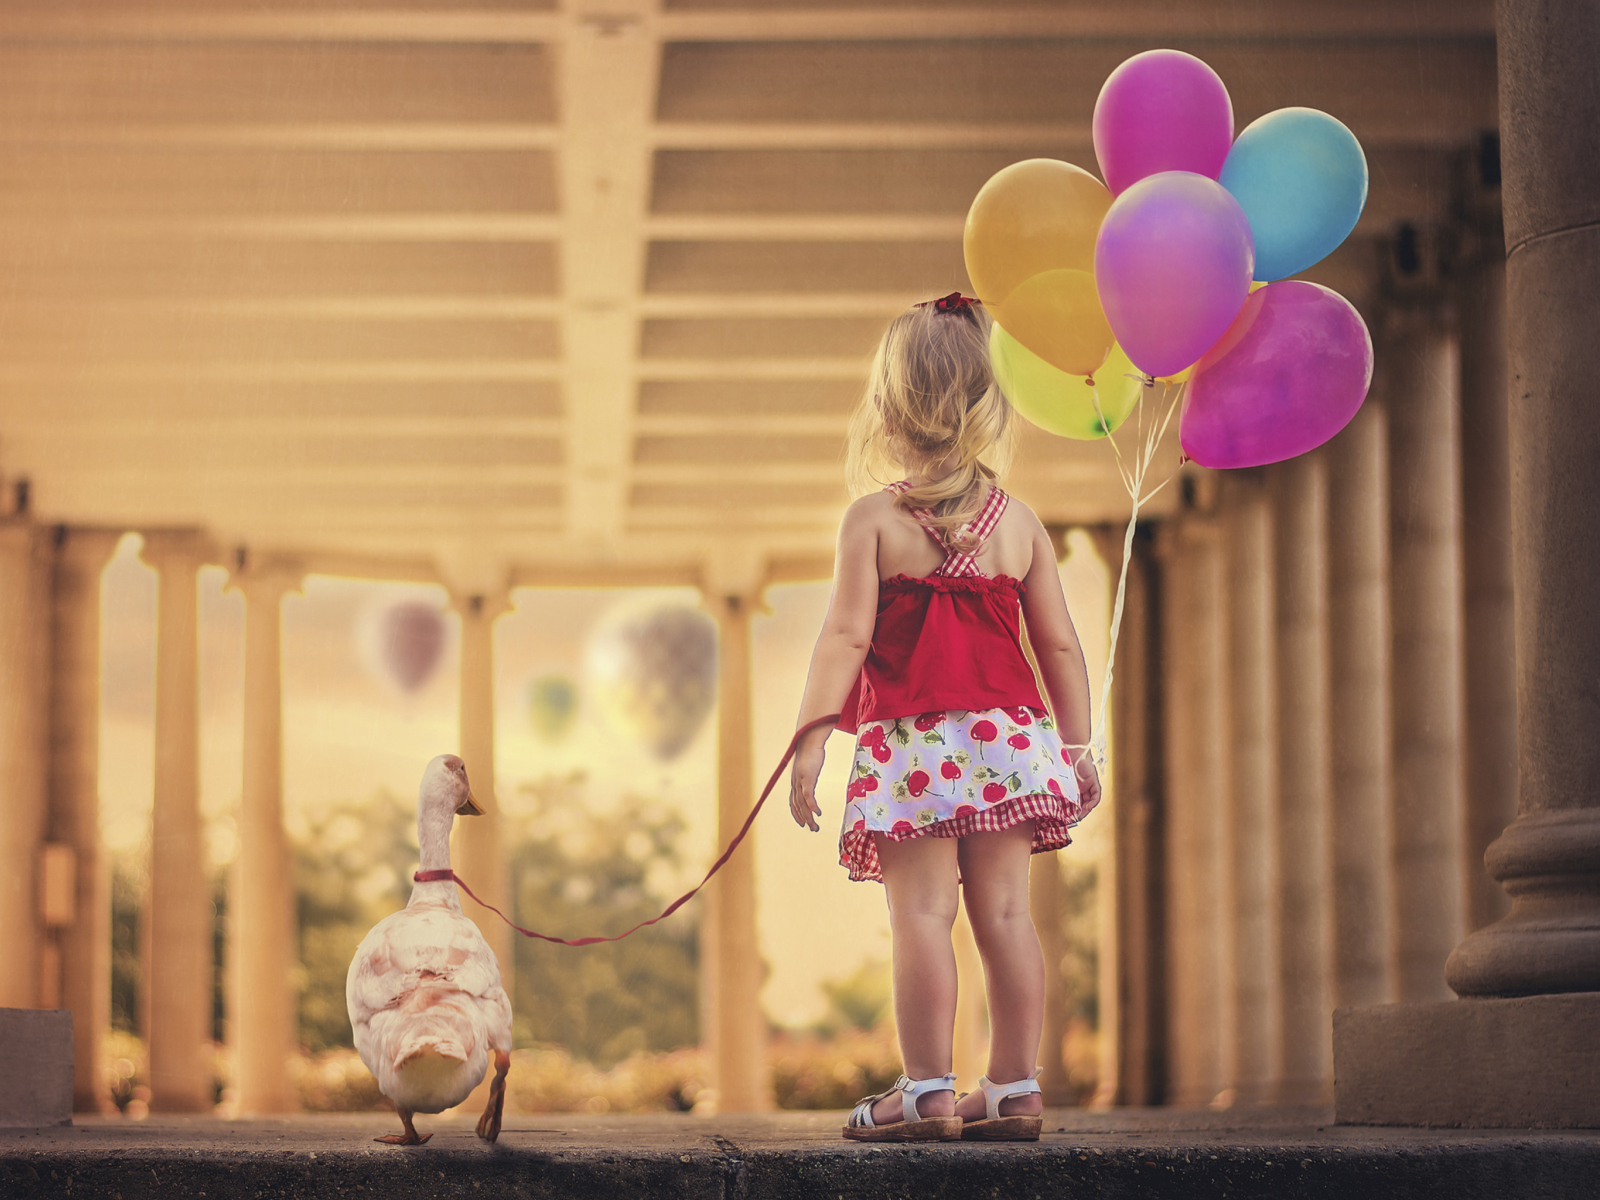 Little Girl With Colorful Balloons wallpaper 1600x1200